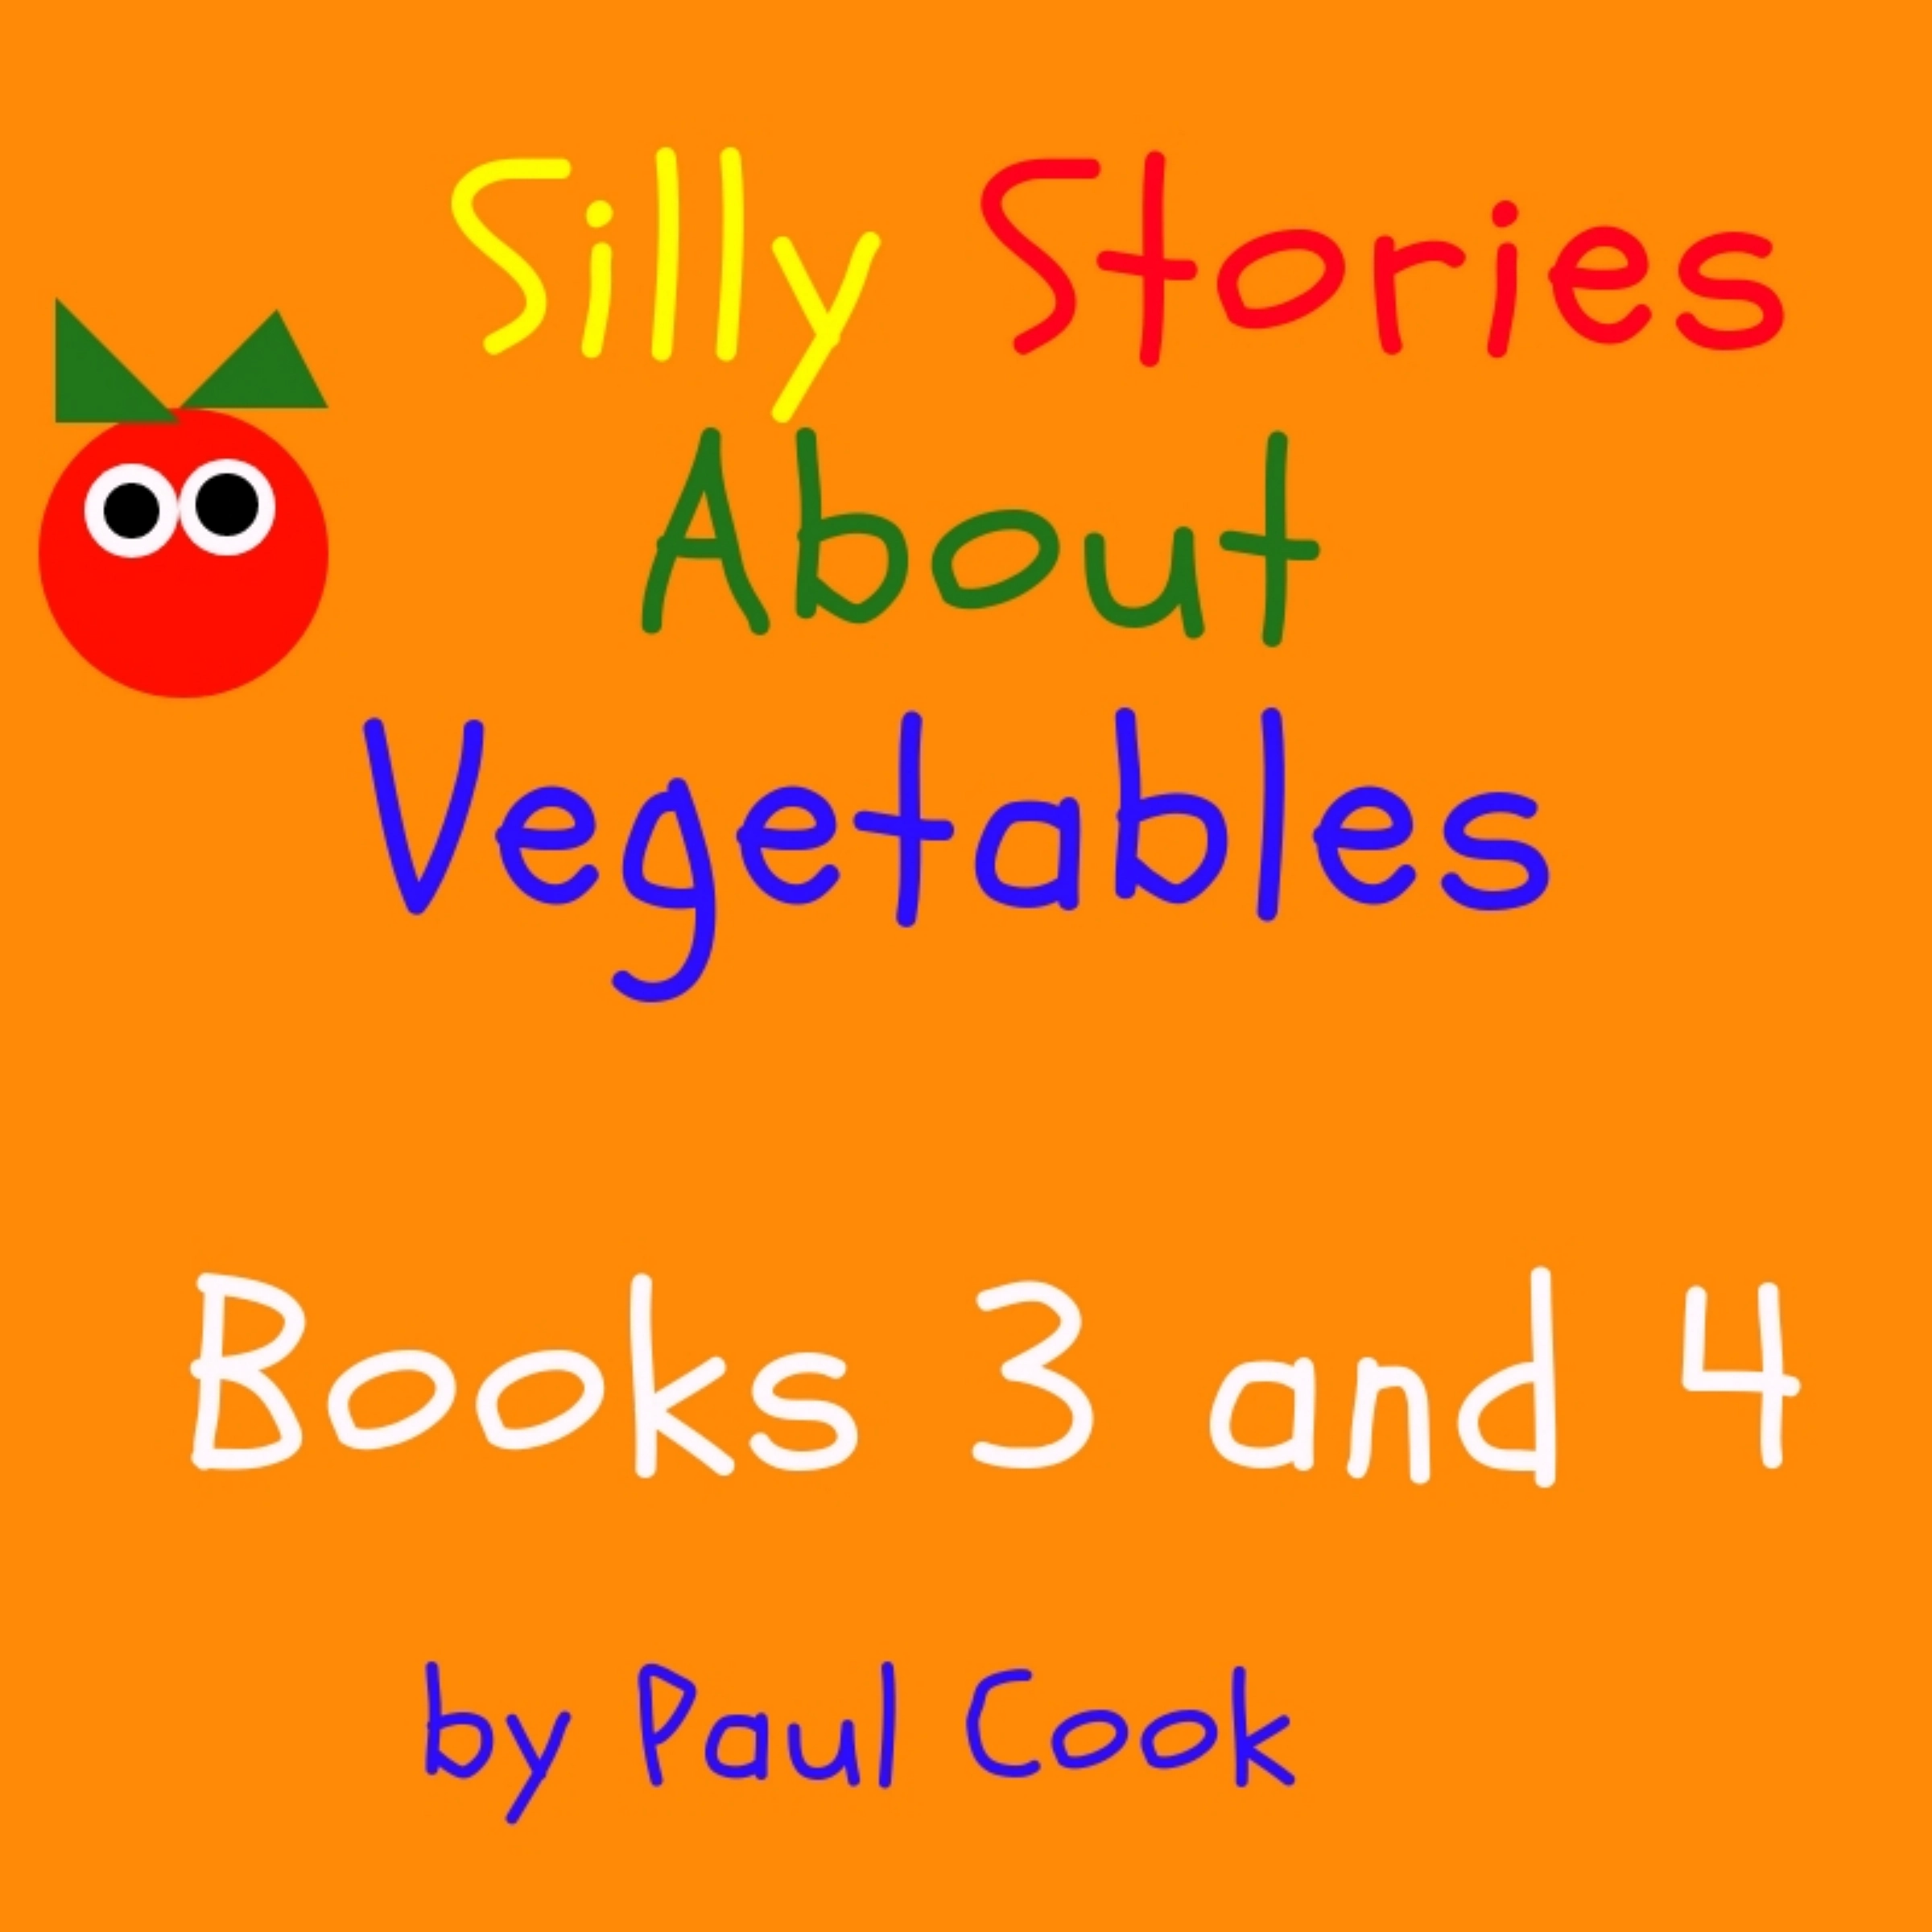 Silly Stories About Vegetables Books 3 and 4 Audiobook by Paul Cook